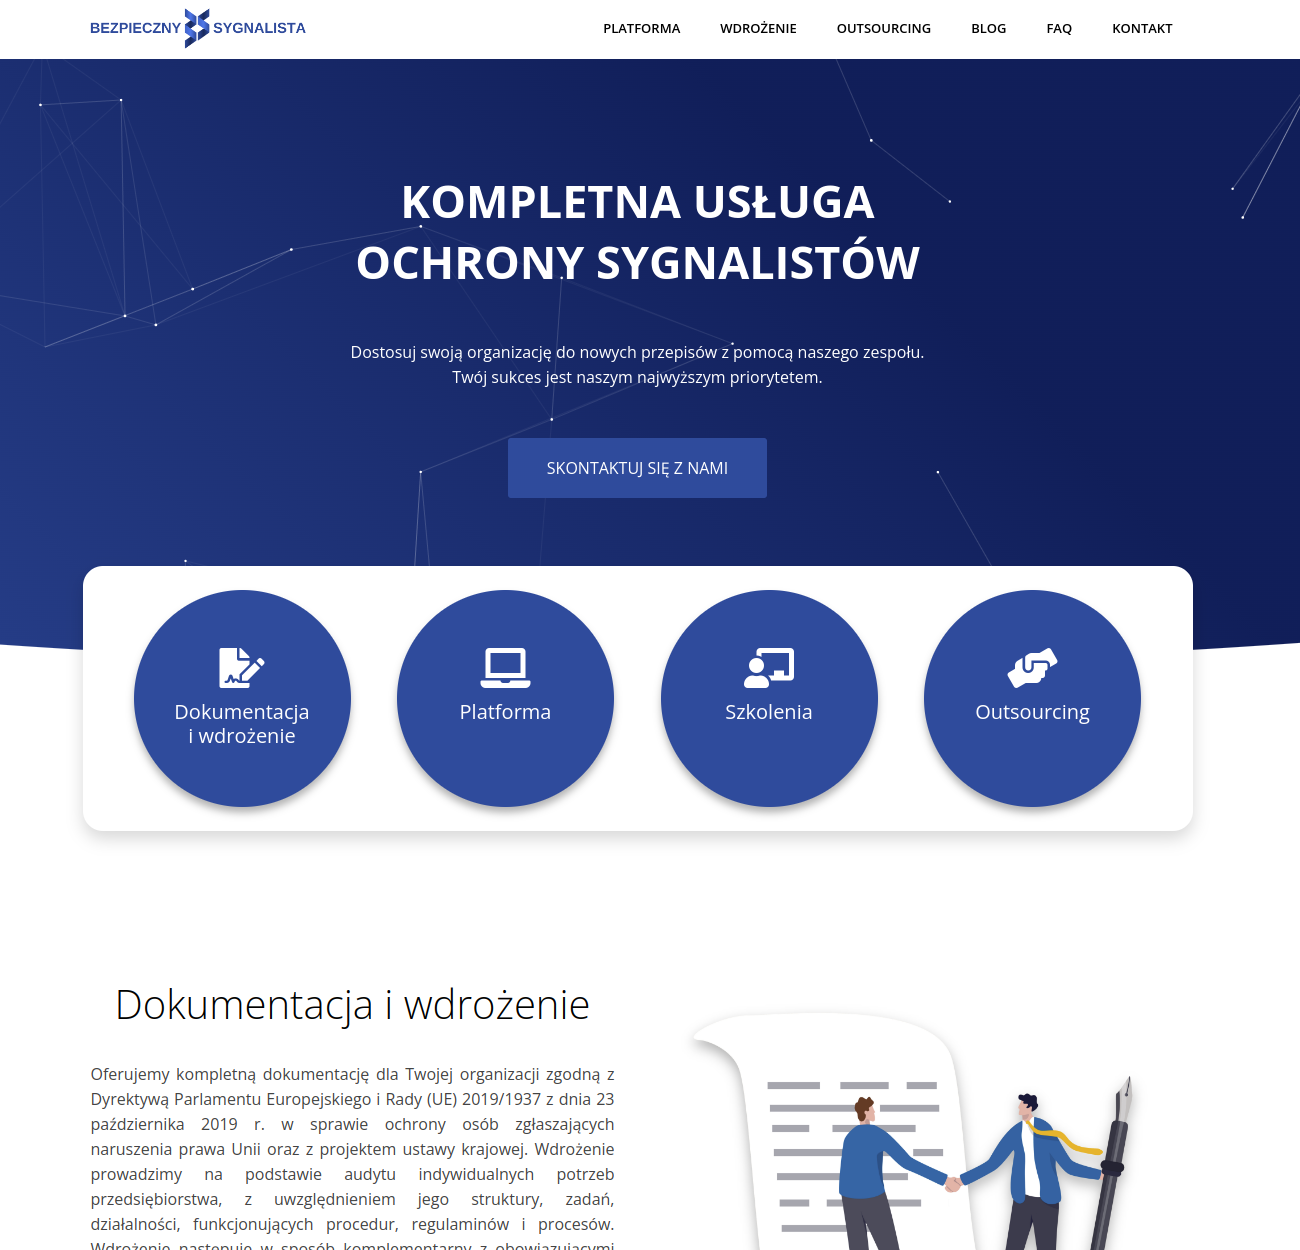 Bezpieczny Sygnalista - design and development of a website and web platform for whistleblowing business and enterpreneurship.